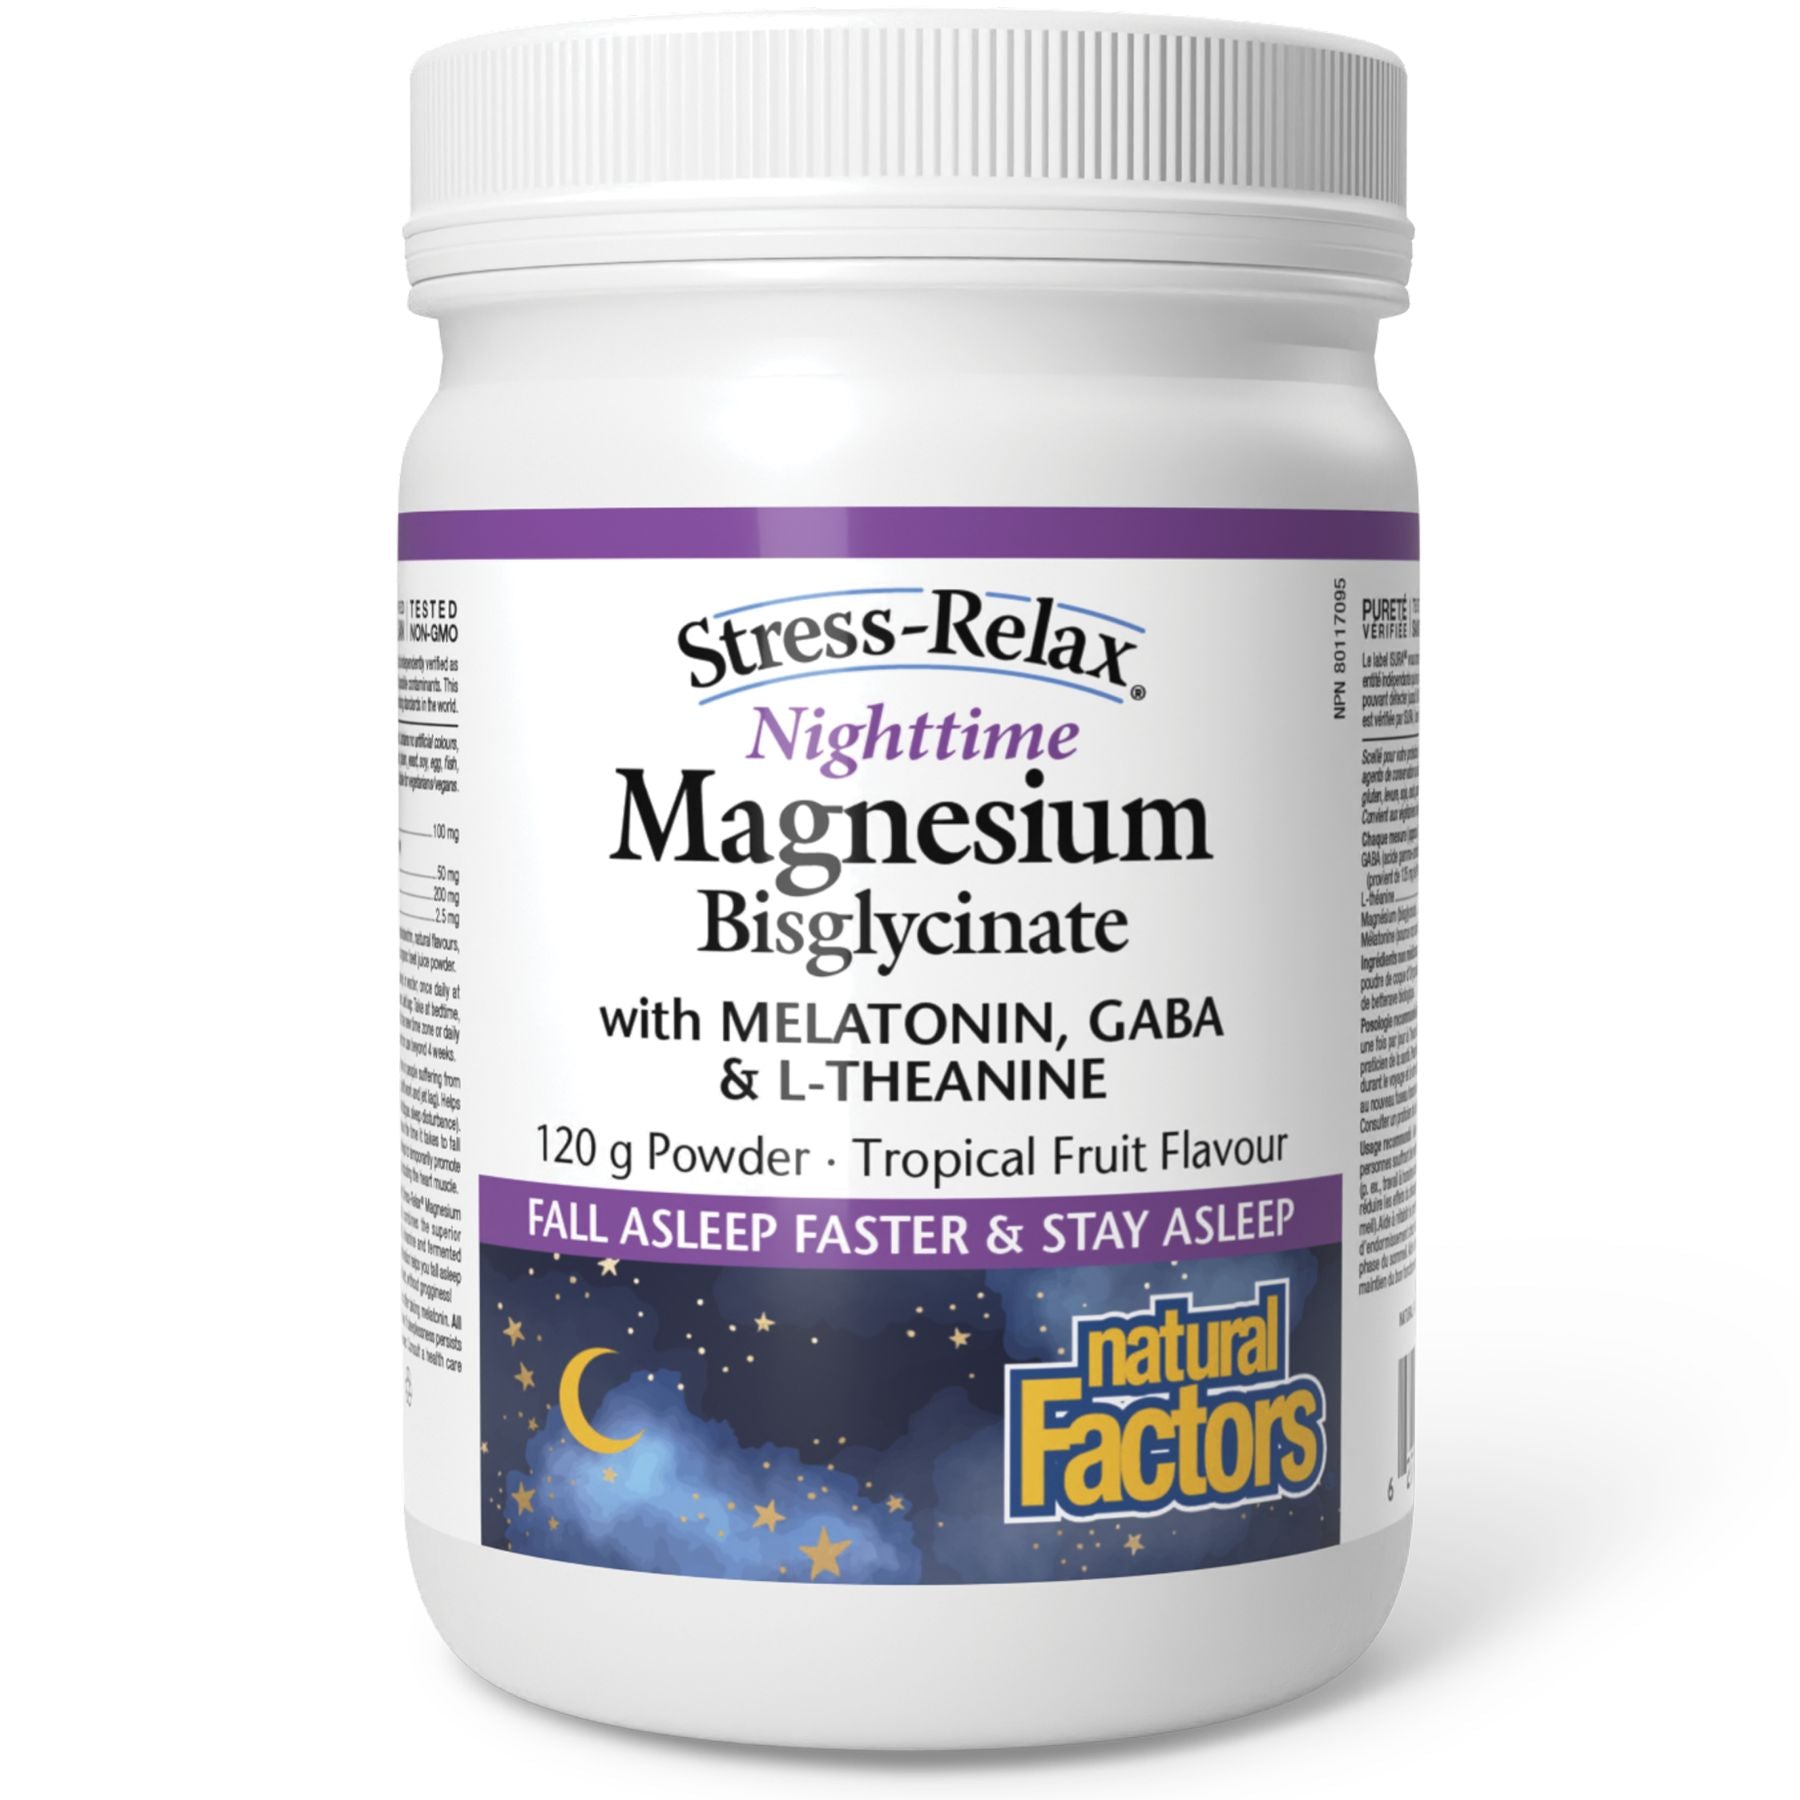 Natural Factors Nighttime Magnesium Bisglycinate Stress Relax Powder 120g